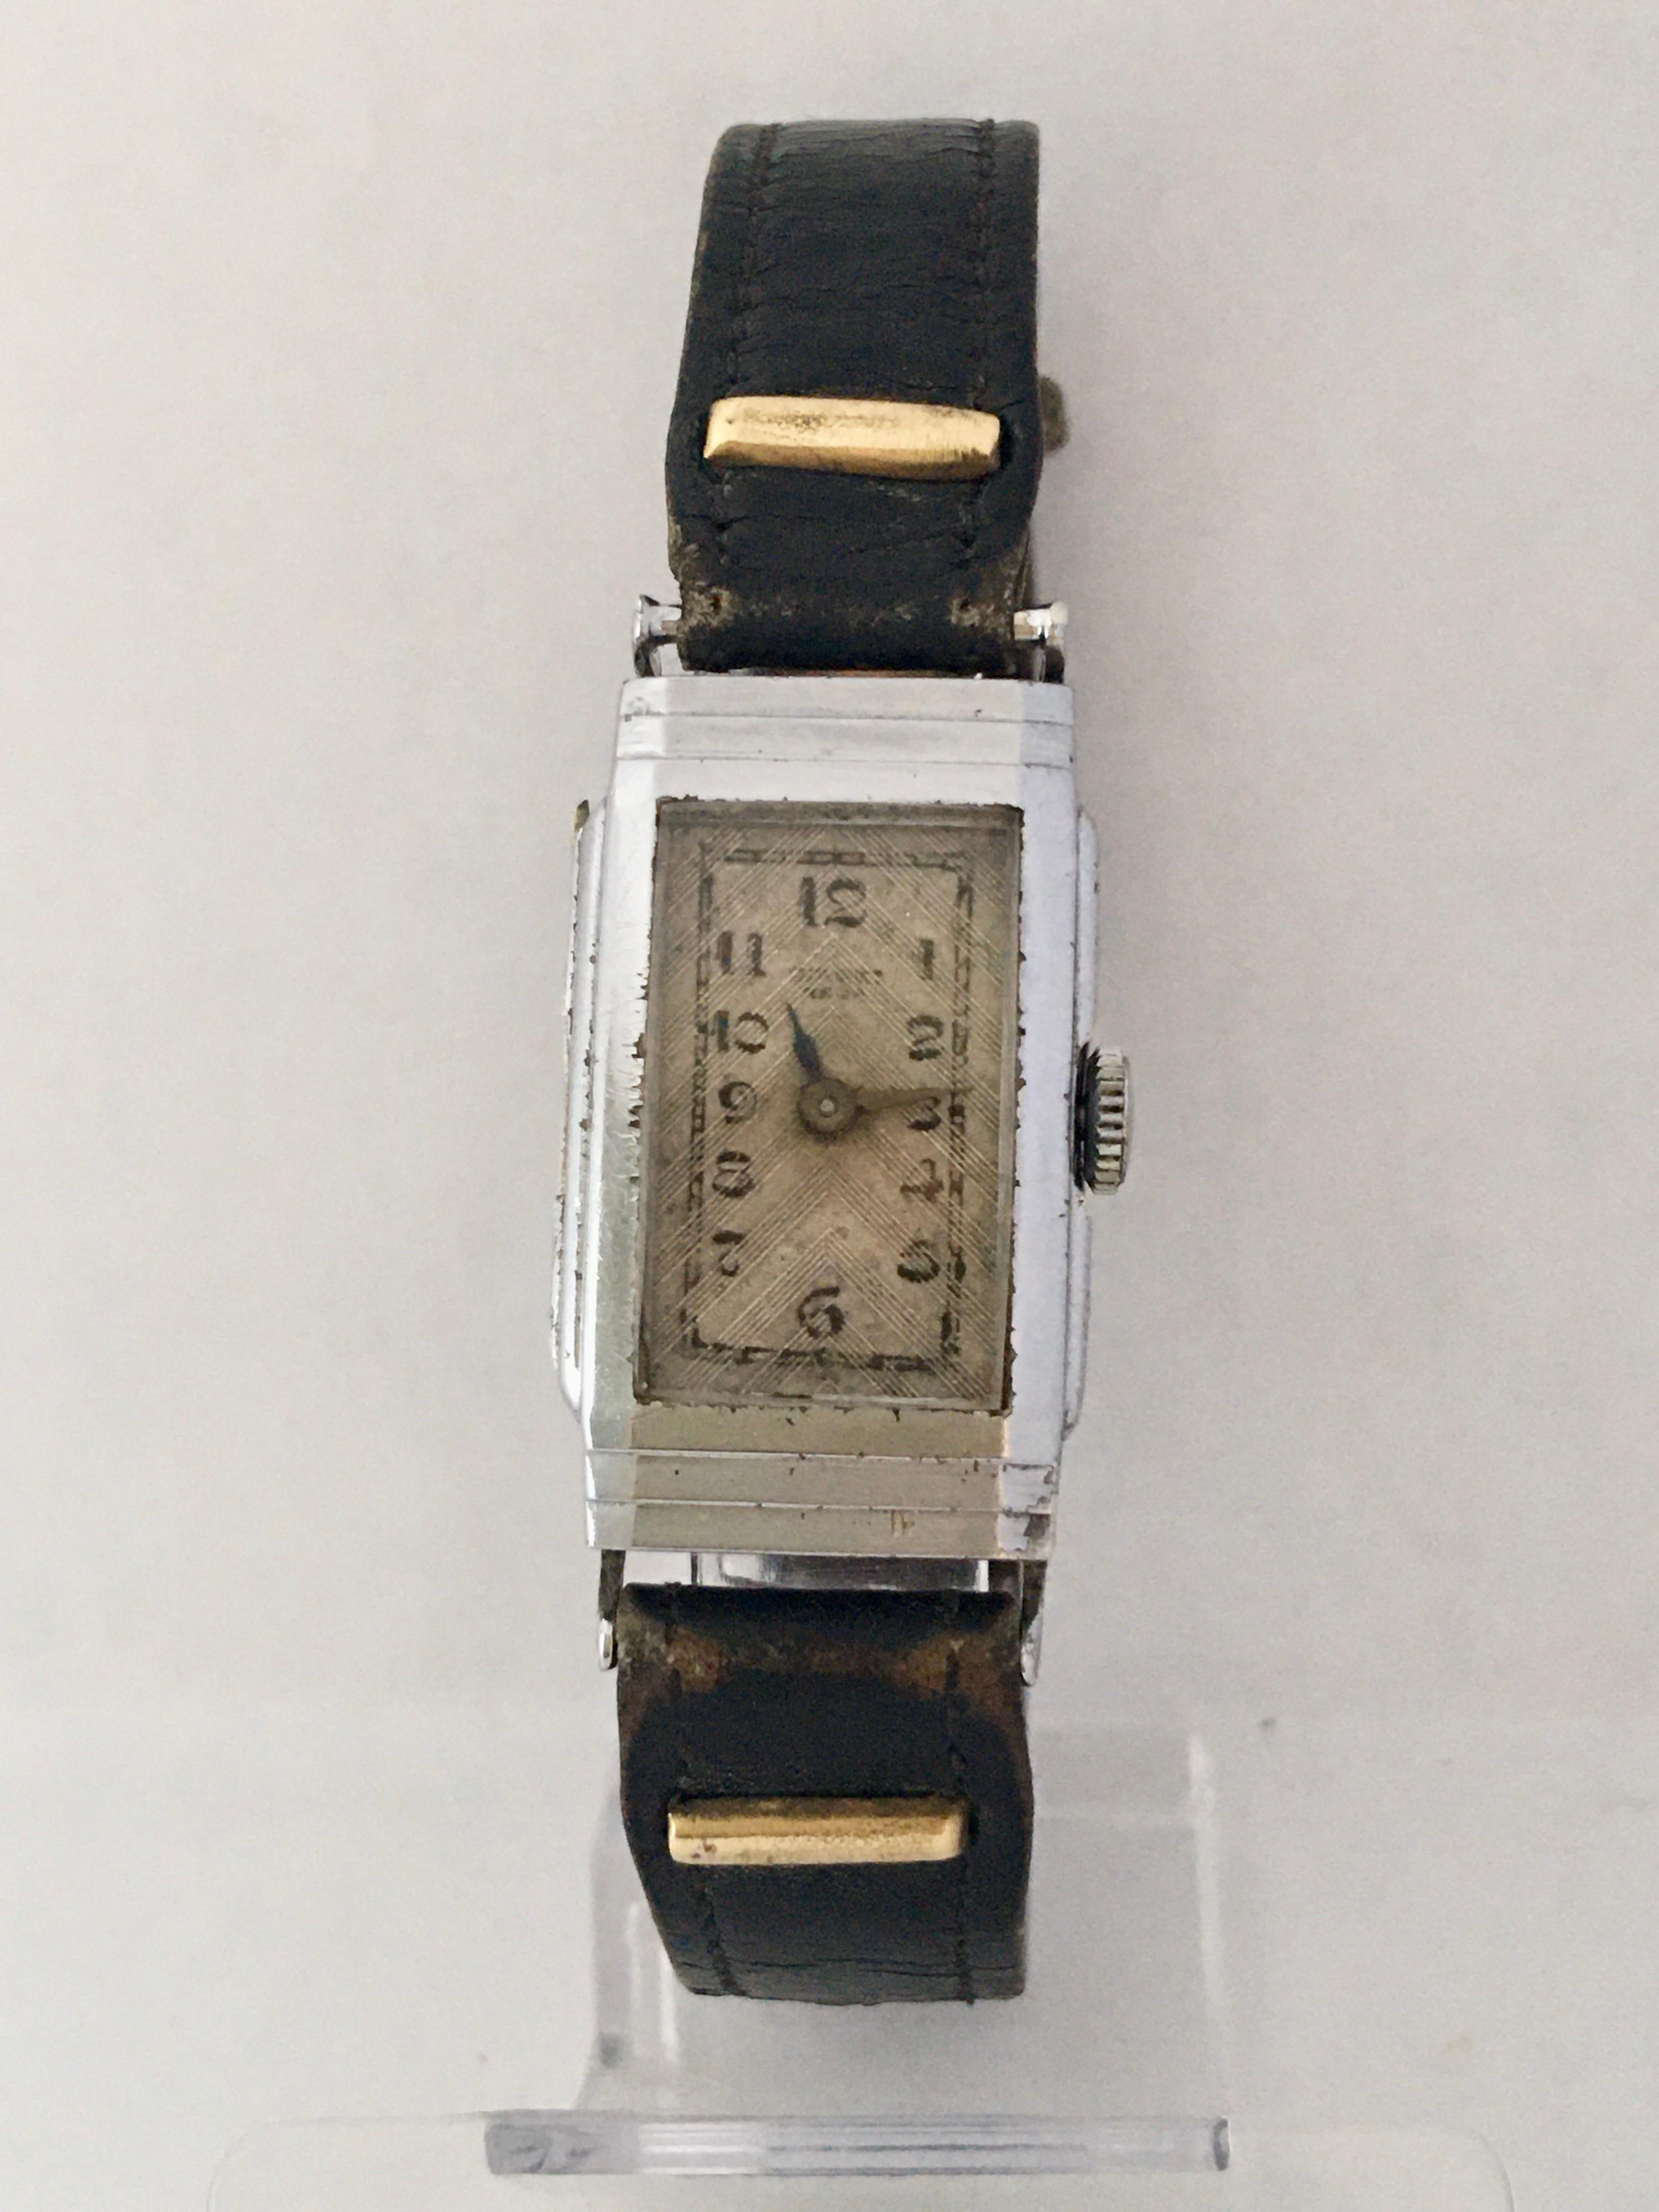 Rare Vintage 1930s Fortis Autorist Self Winding Watch by John Harwood For Sale 13